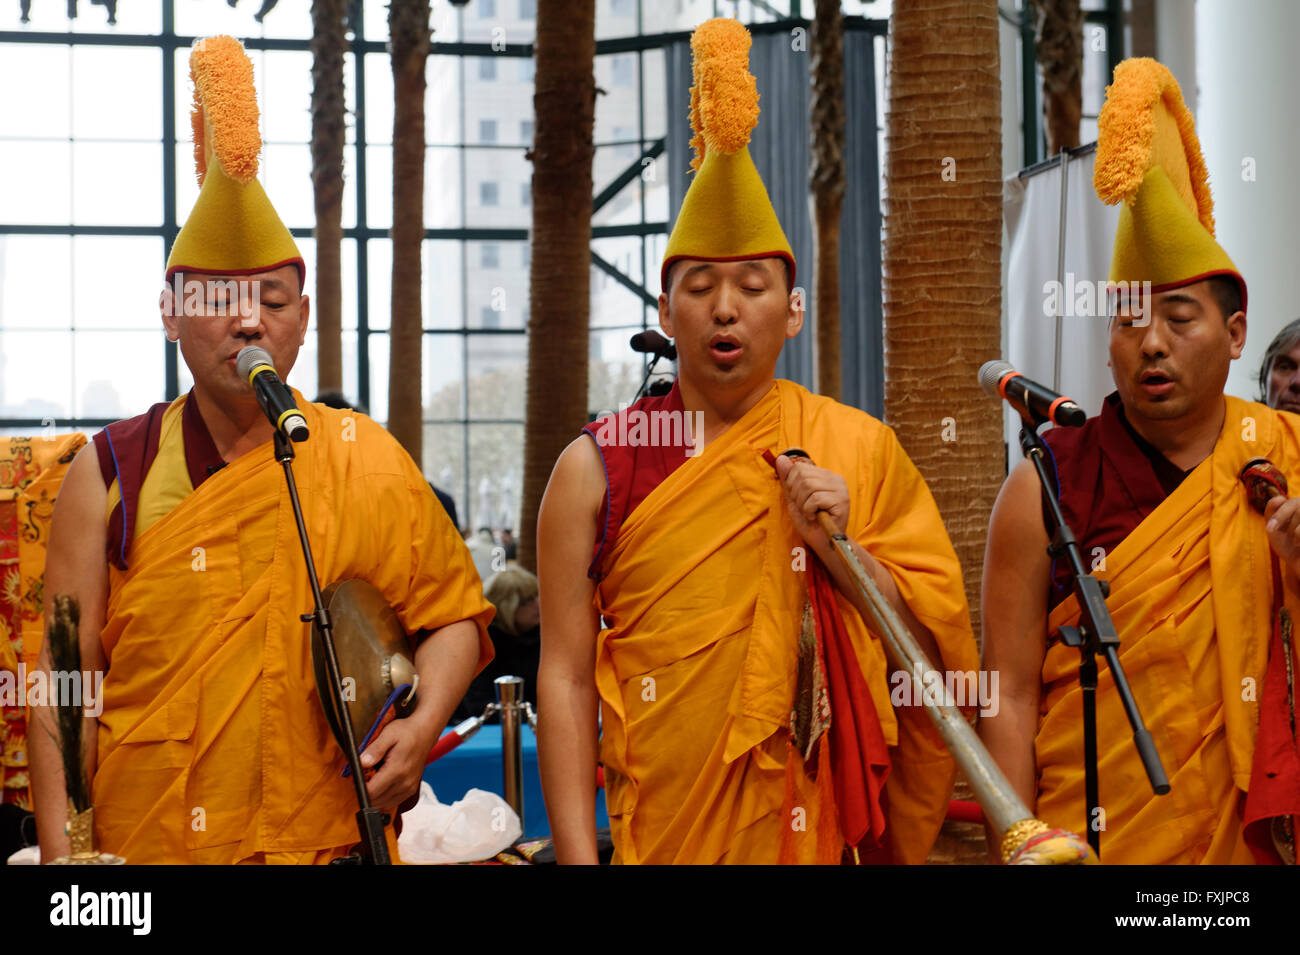 Buddhist monks from the Drepung Loseling Monastery chanting and playing instruments at the Winter Garden in Battery Park City. Stock Photo